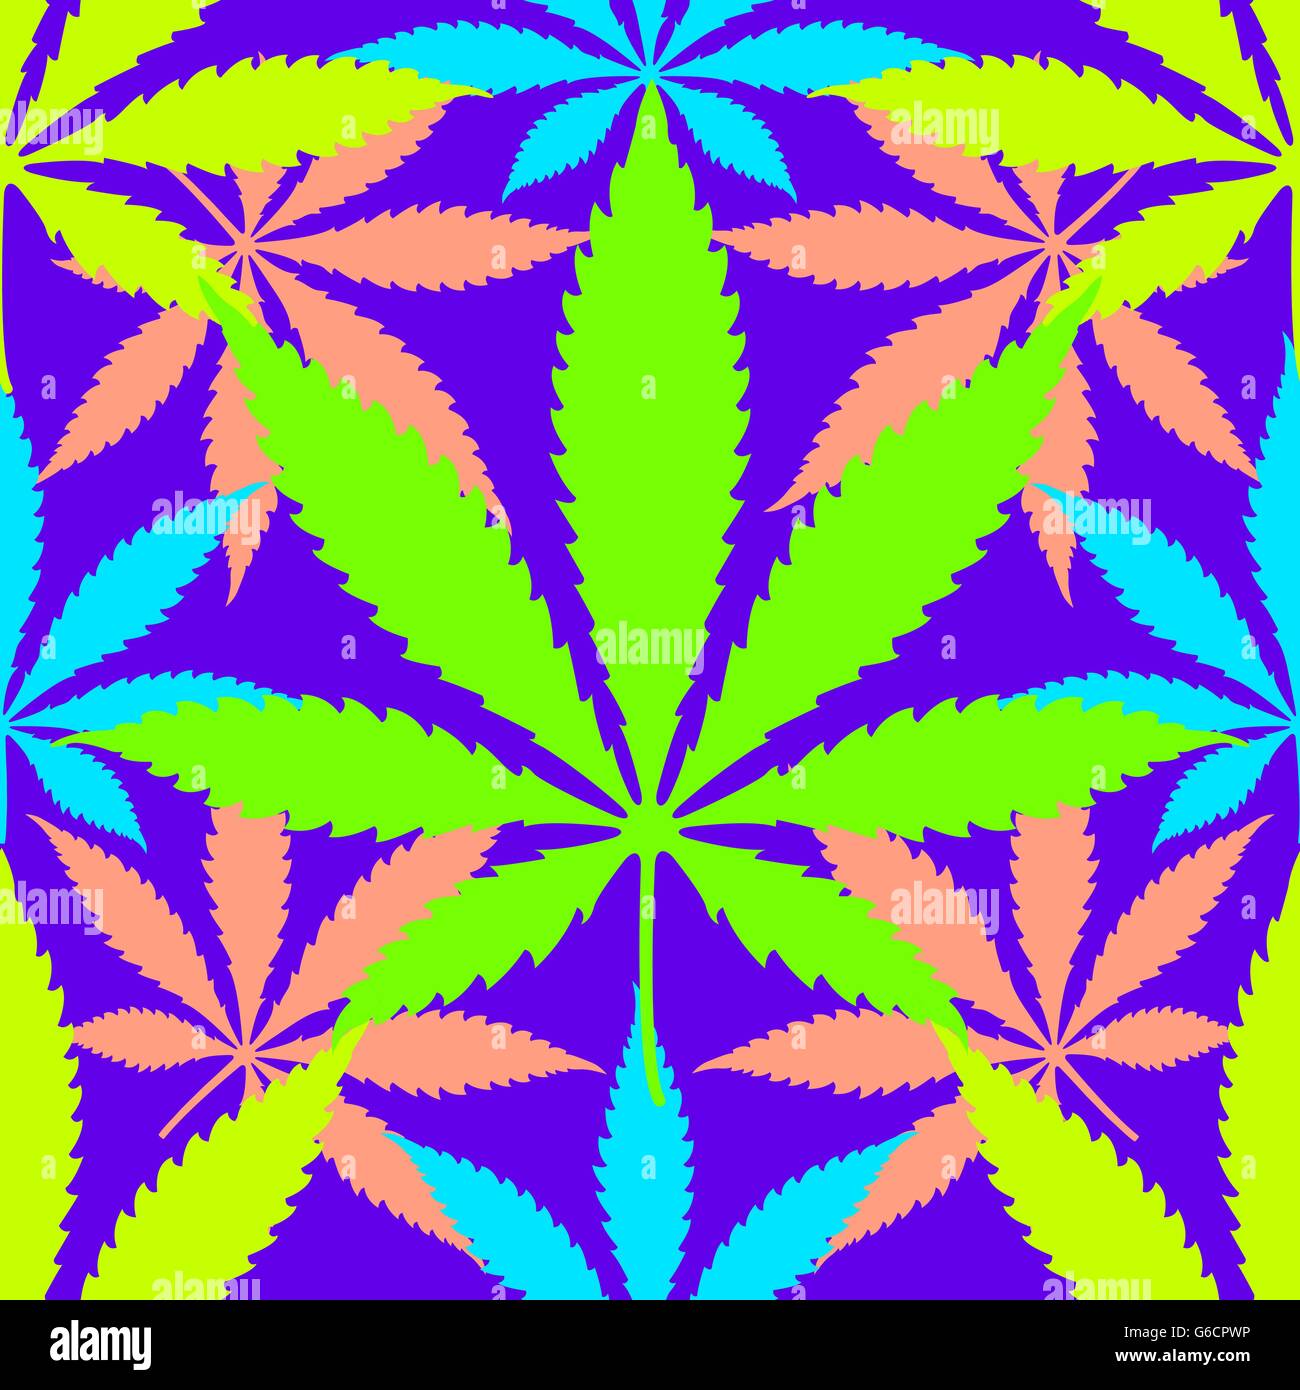 vector various vibrant colors cannabis marijuana leaves silhouettes abstract seamless pattern violet background Stock Vector